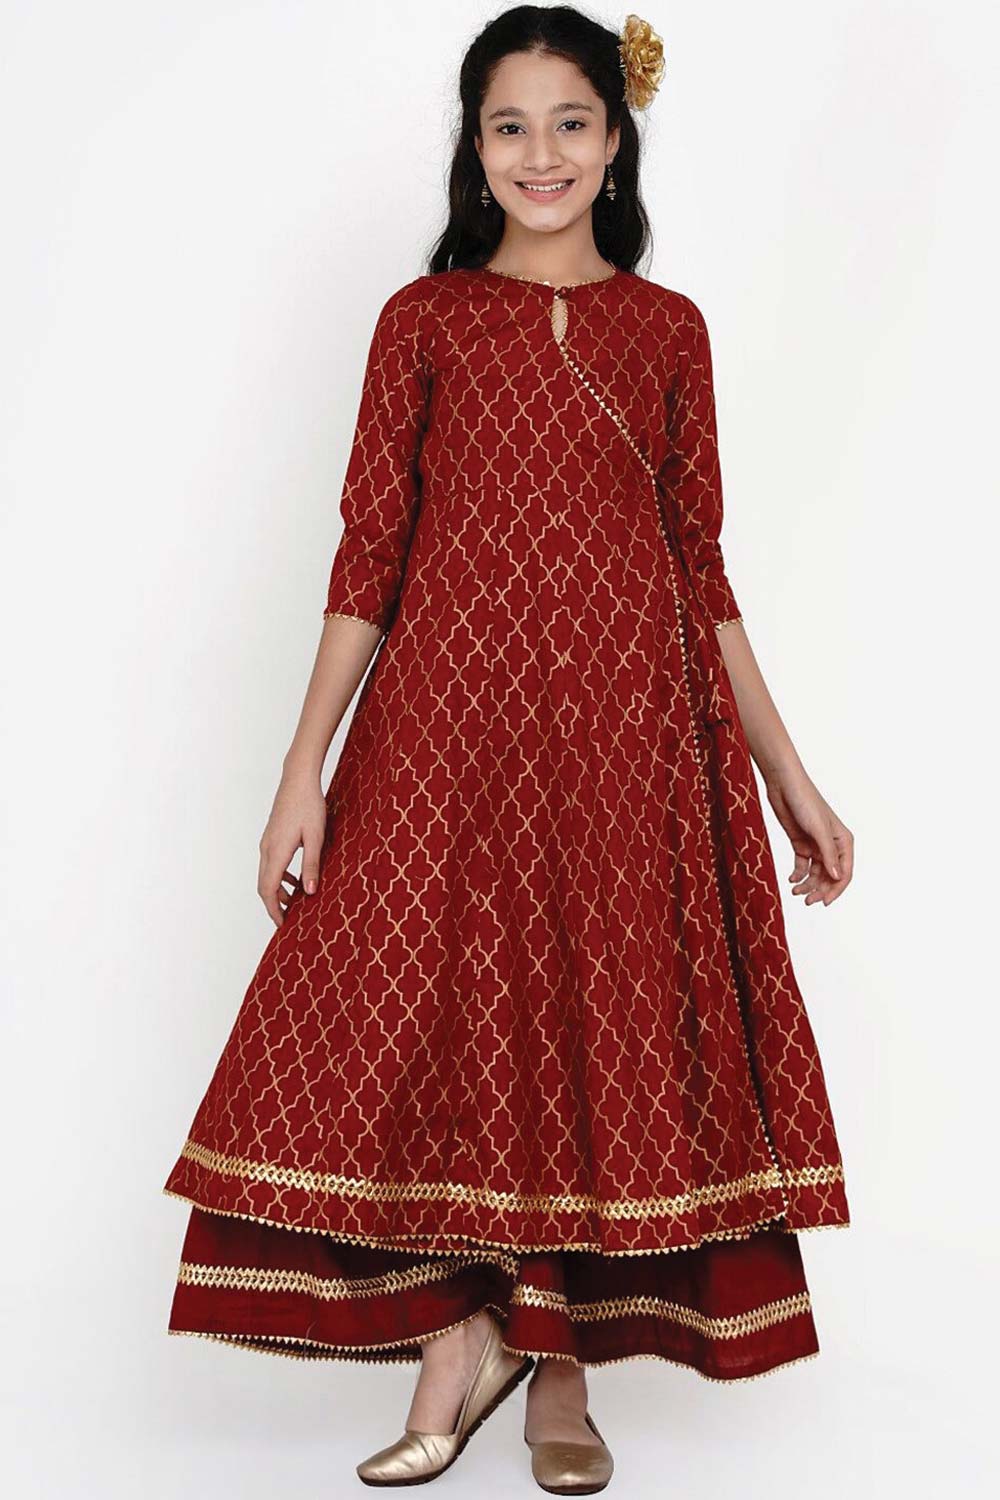 Buy Girl's Maroon And Gold Ethnic Motifs Foil Print Anarkali Kurta With Palazzos Online